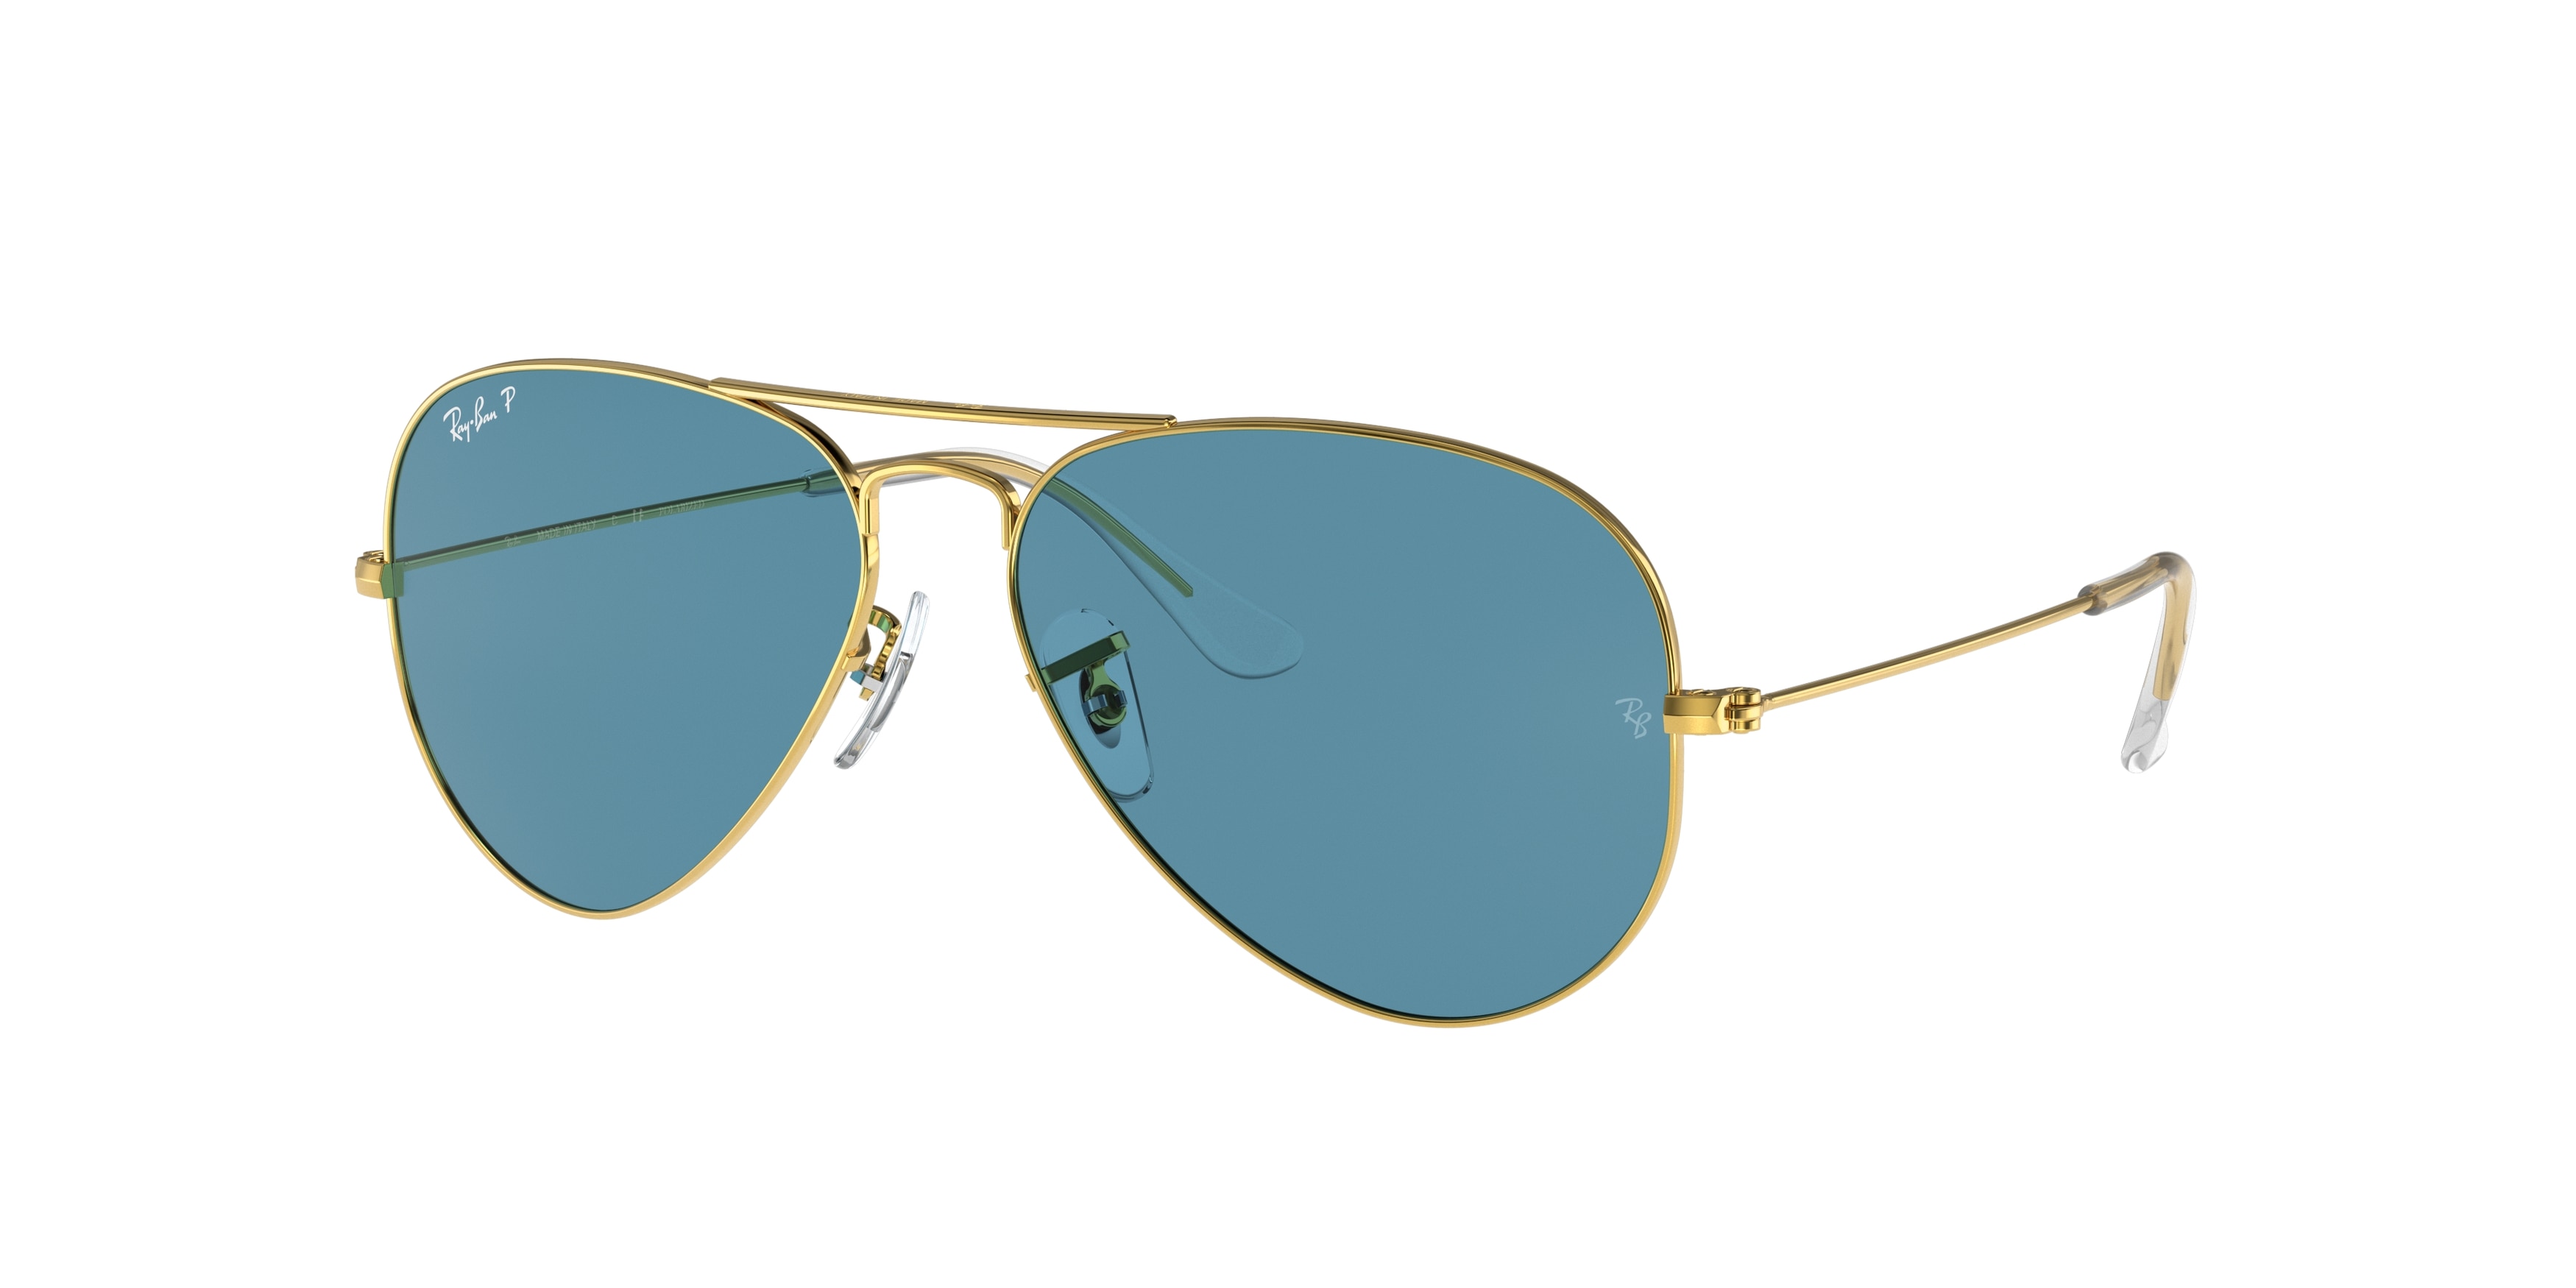 Ray-ban Aviator Large Metal RB3025 9196S2 Gold Polarized (Blue)